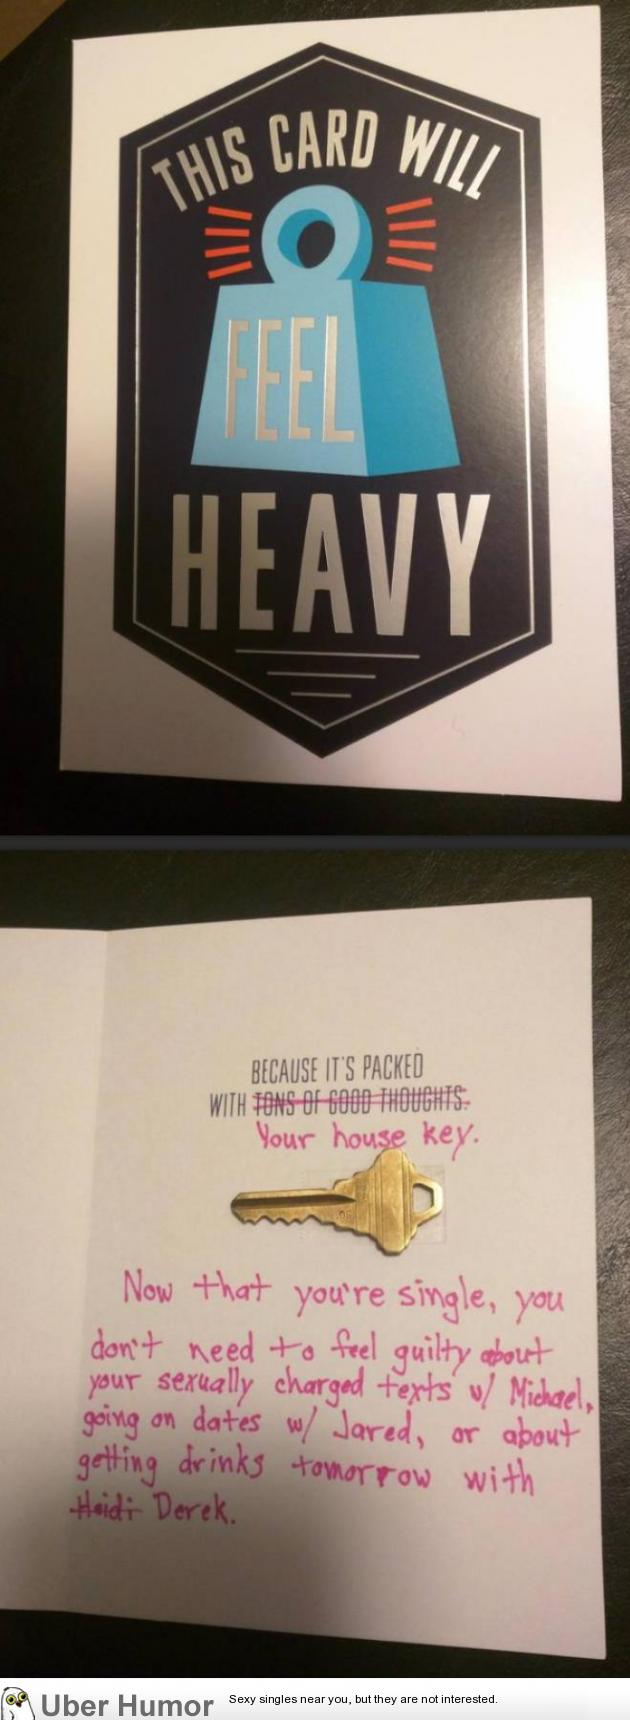 Found out my girlfriend is cheating on me. Giving her this card tonight at  my birthday dinner. | Funny Pictures, Quotes, Pics, Photos, Images. Videos  of Really Very Cute animals.